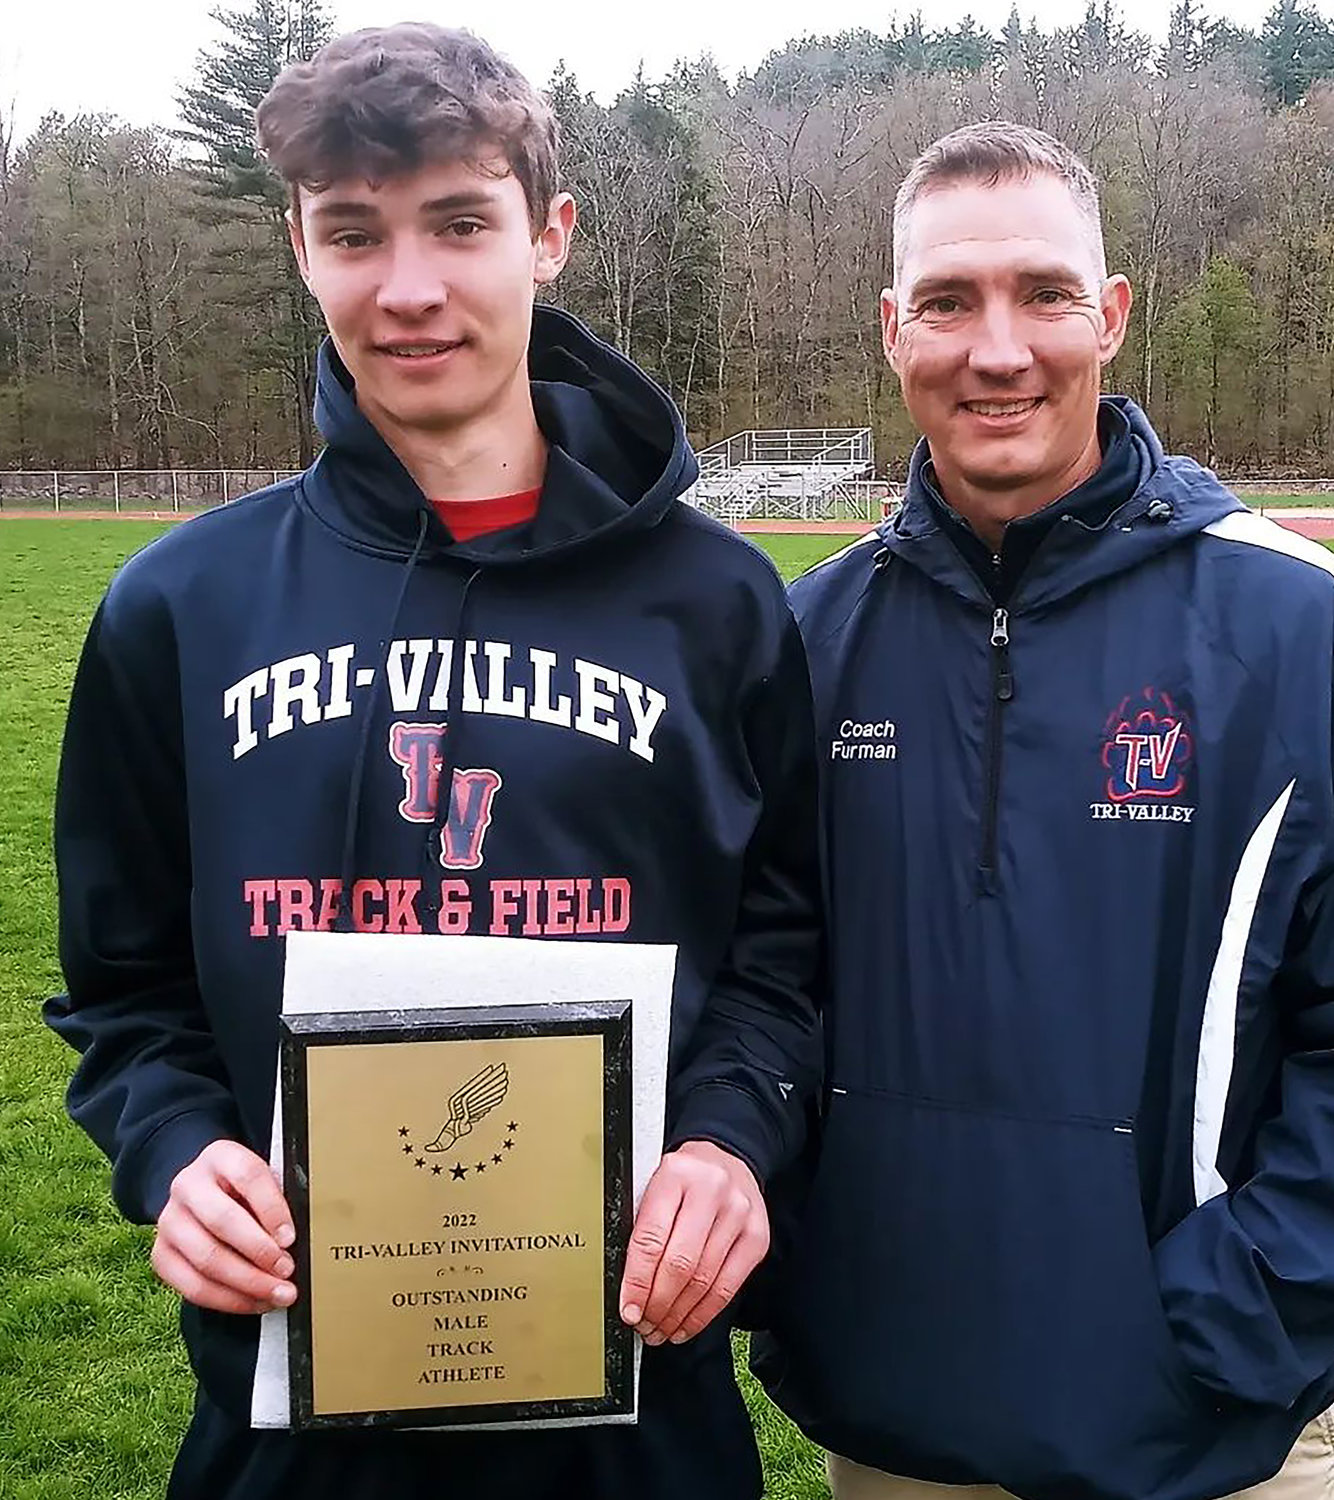 Tri-Valley’s Adam Furman poses with his dad and coach Chip after being named by the coaches at the meet as the Outstanding Male Track Athlete. He won the 400, 800 1600 and 3200.